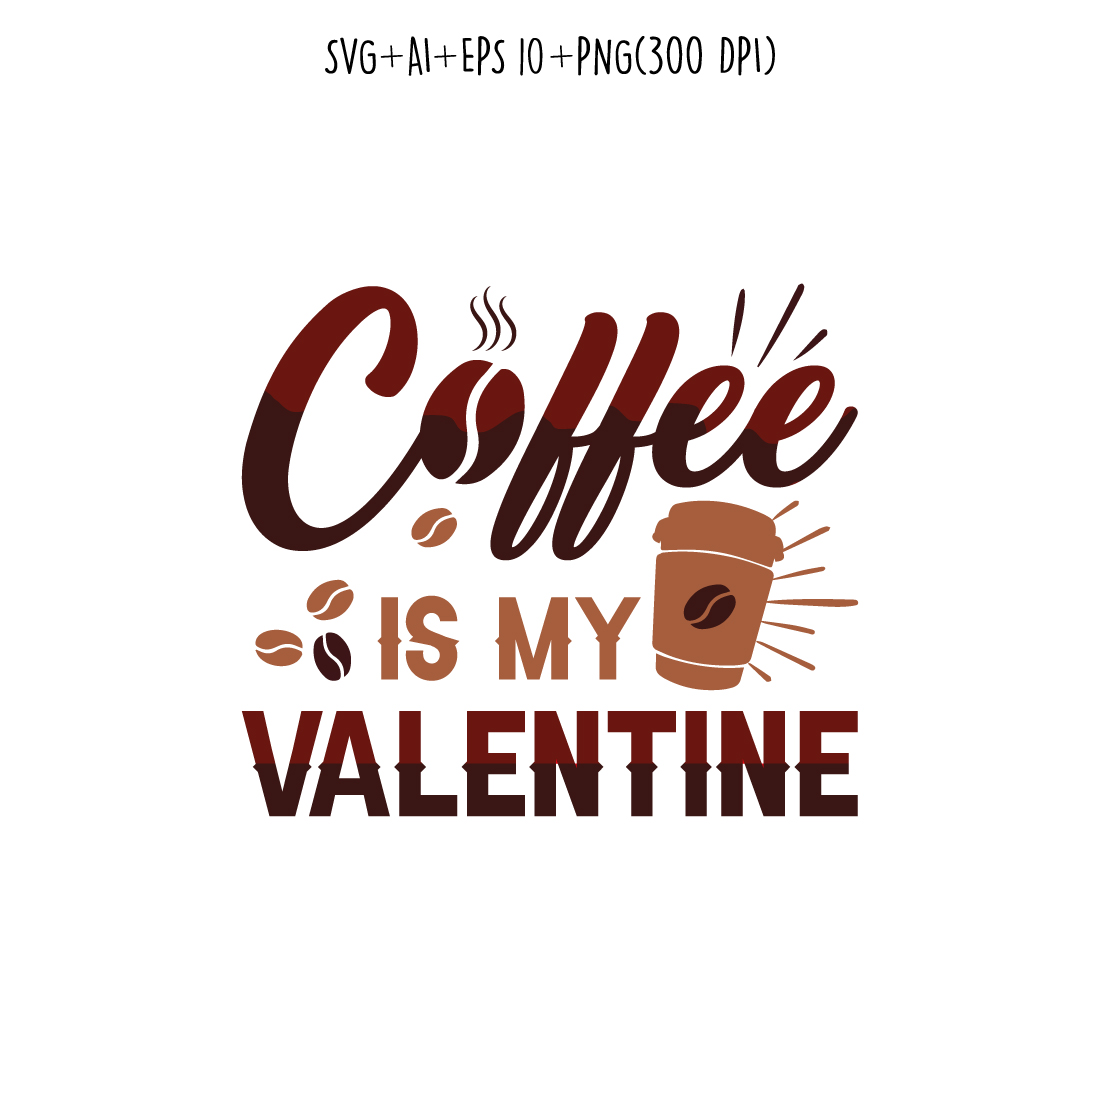 coffee is my valentine coffee typography design for t-shirts, print, templates, logos, mug preview image.